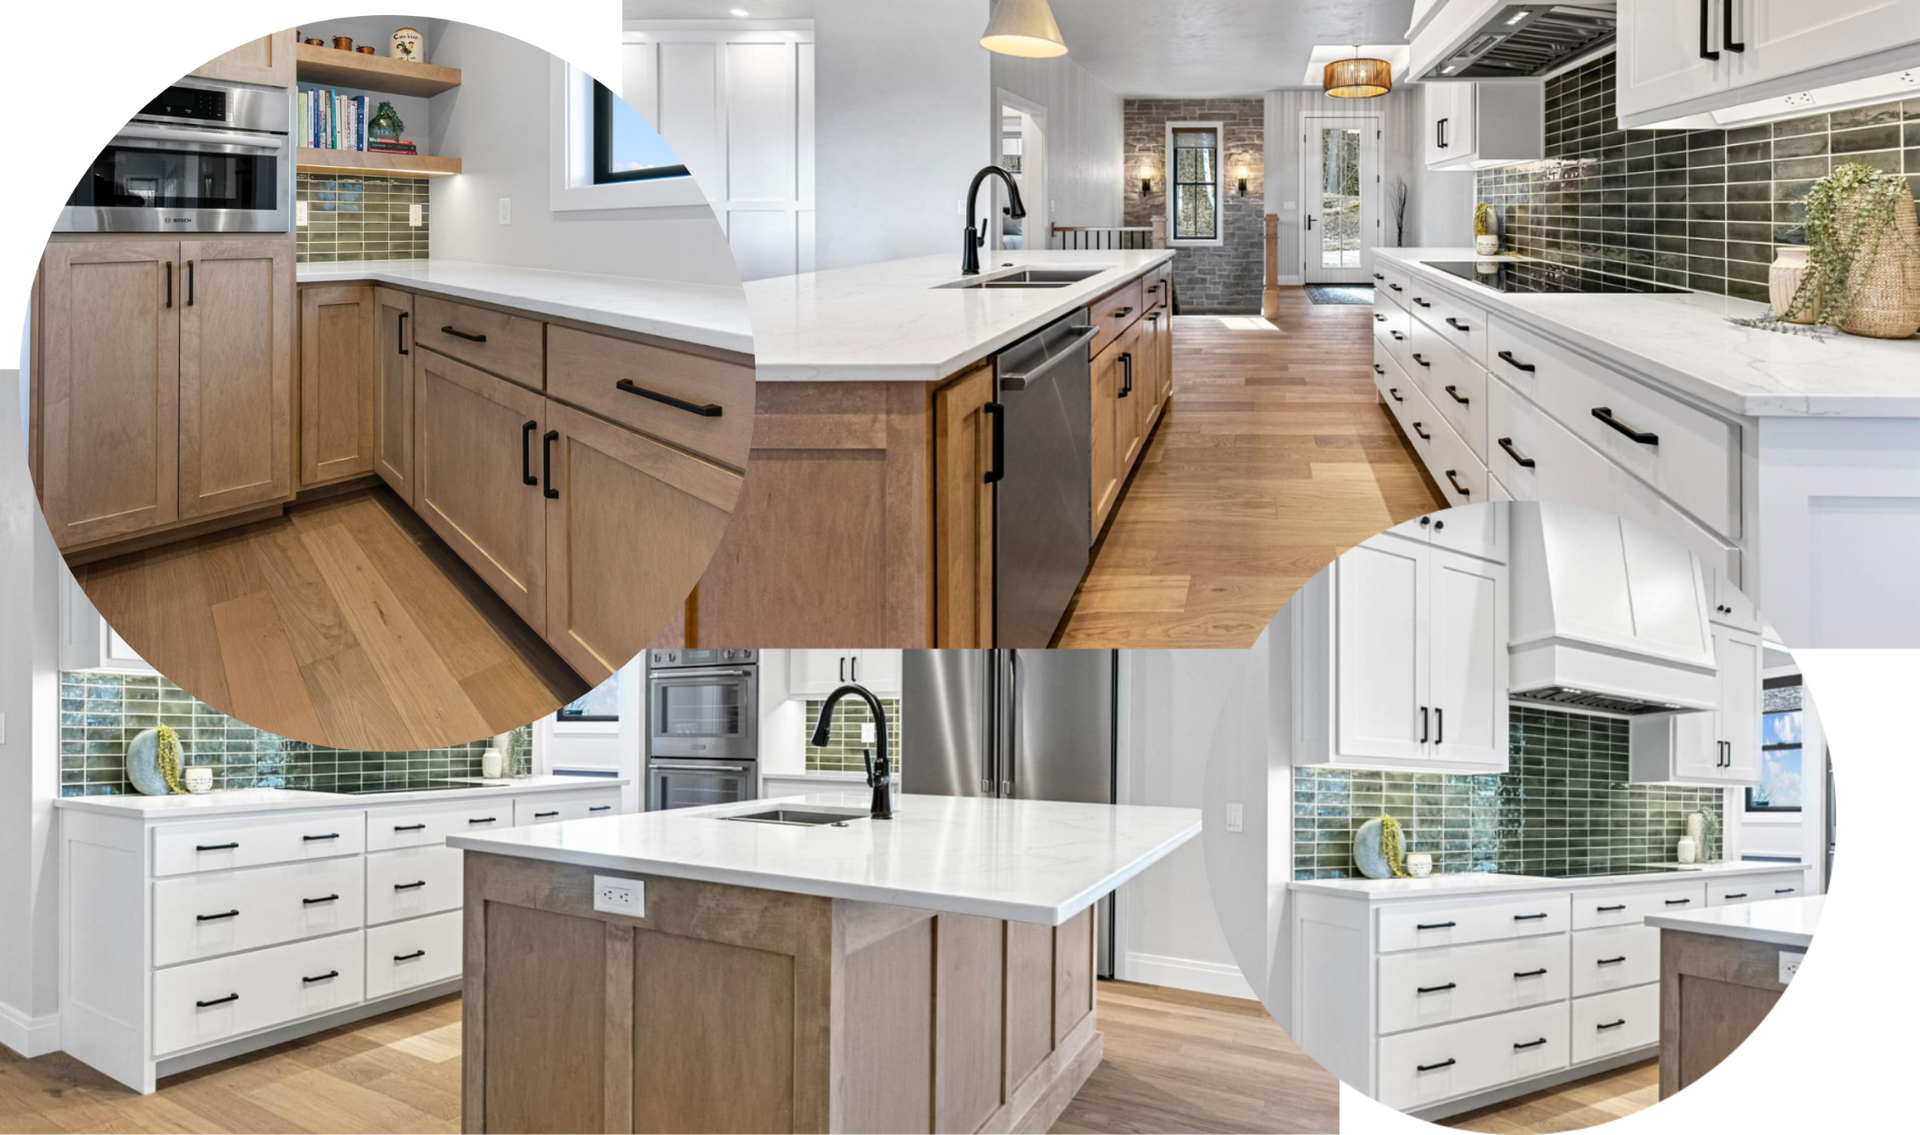 A collage of pictures of a kitchen with wooden cabinets and white counter tops.